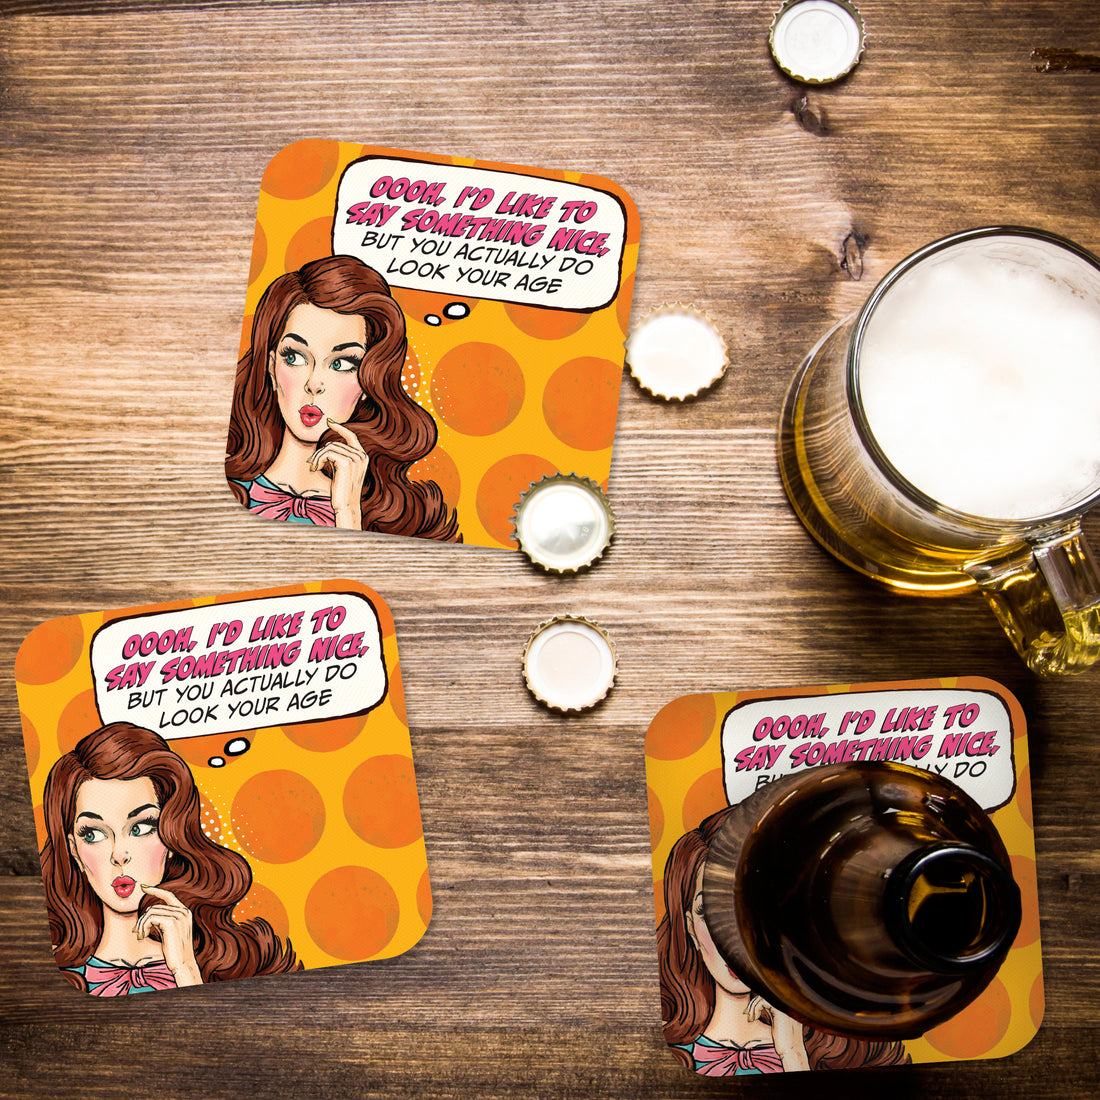 Coaster: Pop Life, Oooh, I'd Like to Say Somthing Nice - Pack of 6